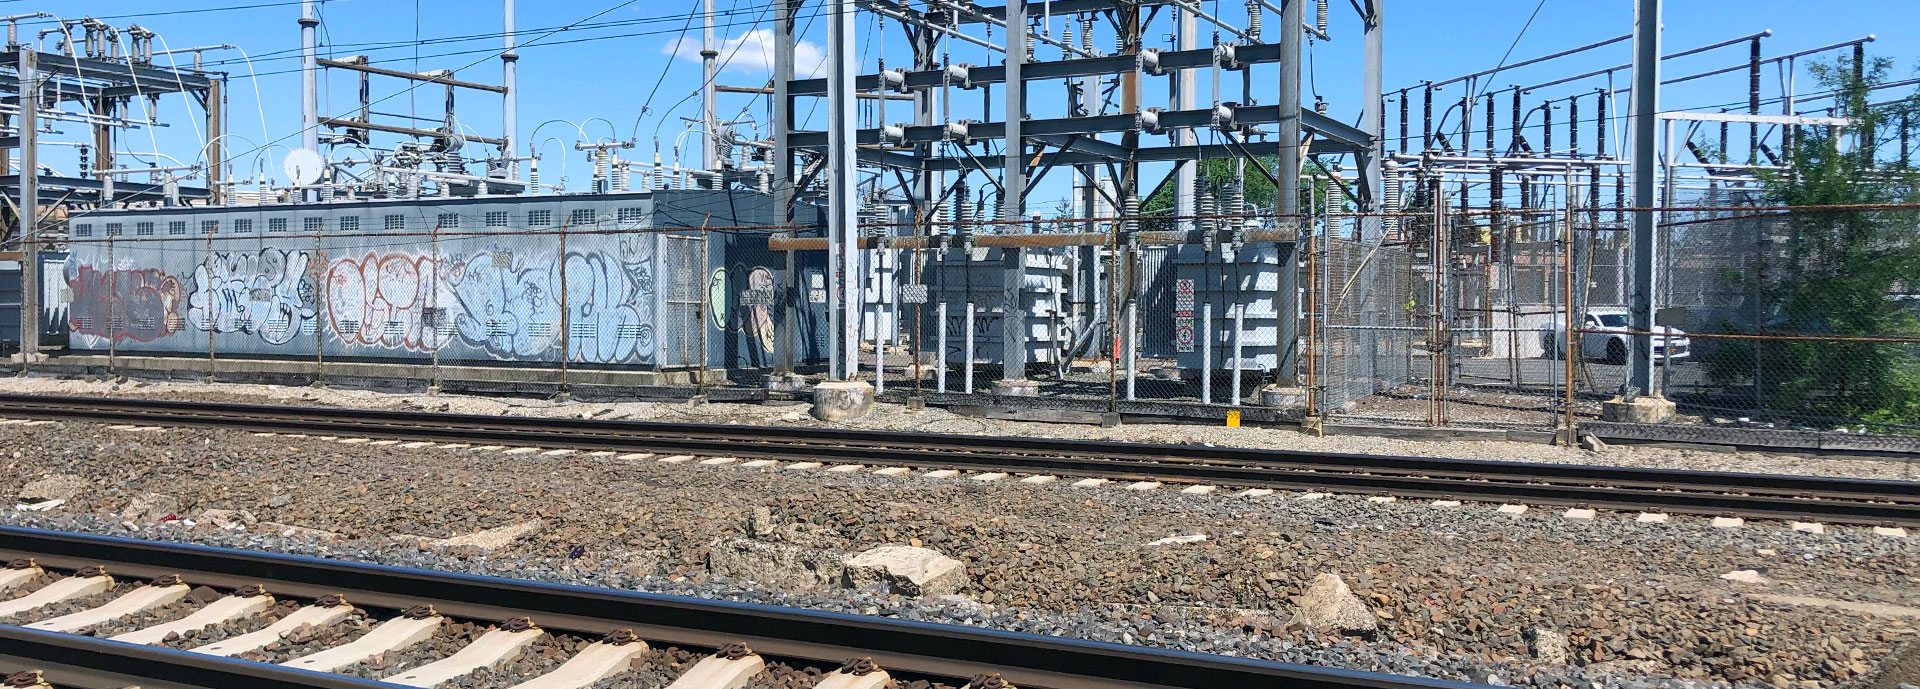 view of electrical grid by train tracks at penn station